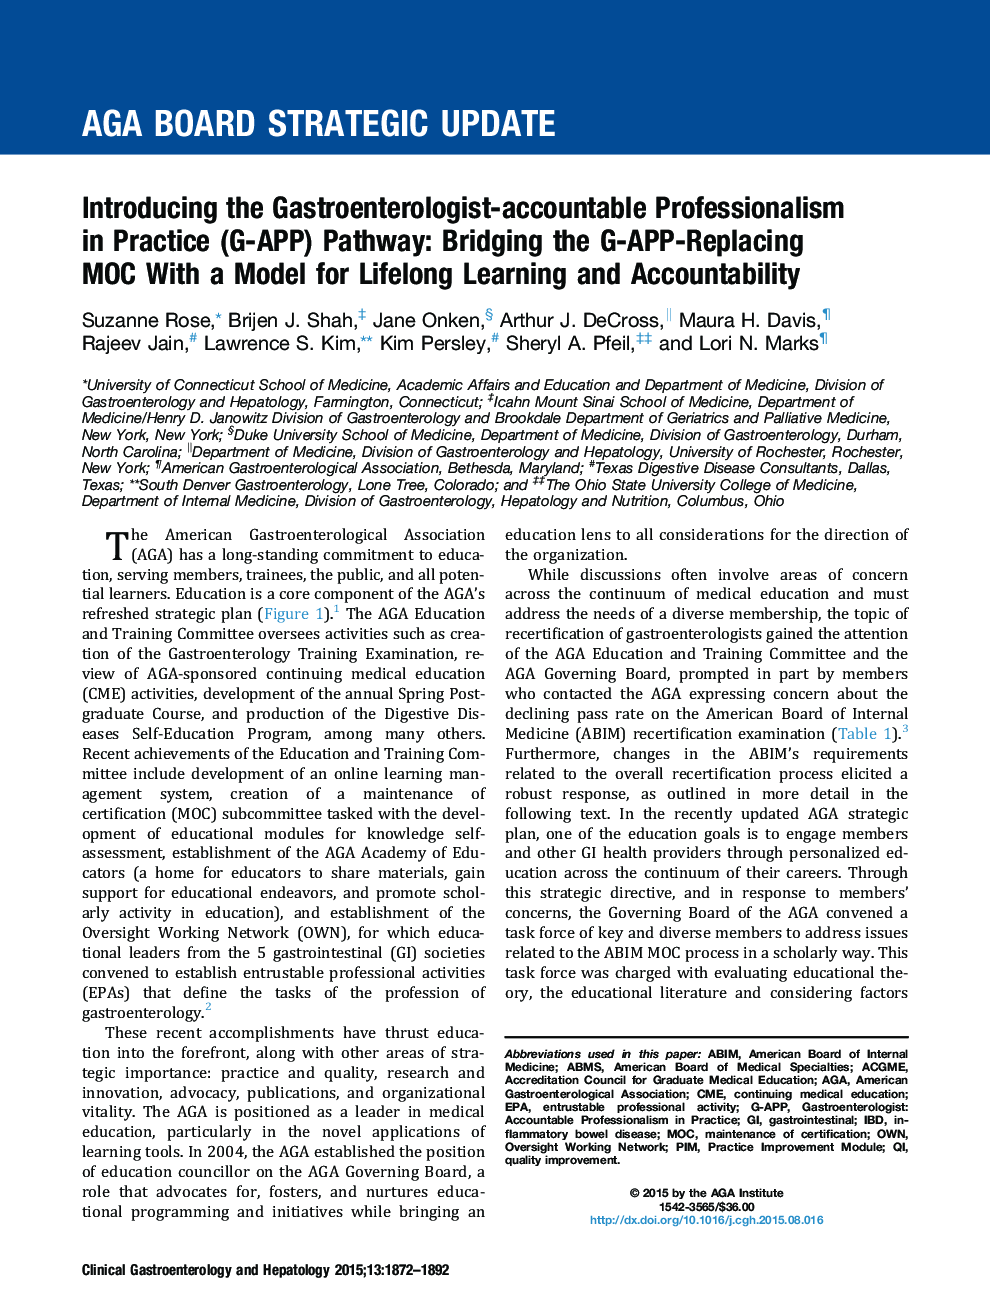 Introducing the Gastroenterologist-accountable Professionalism in Practice (G-APP) Pathway: Bridging the G-APP-Replacing MOC With a Model for Lifelong Learning and Accountability